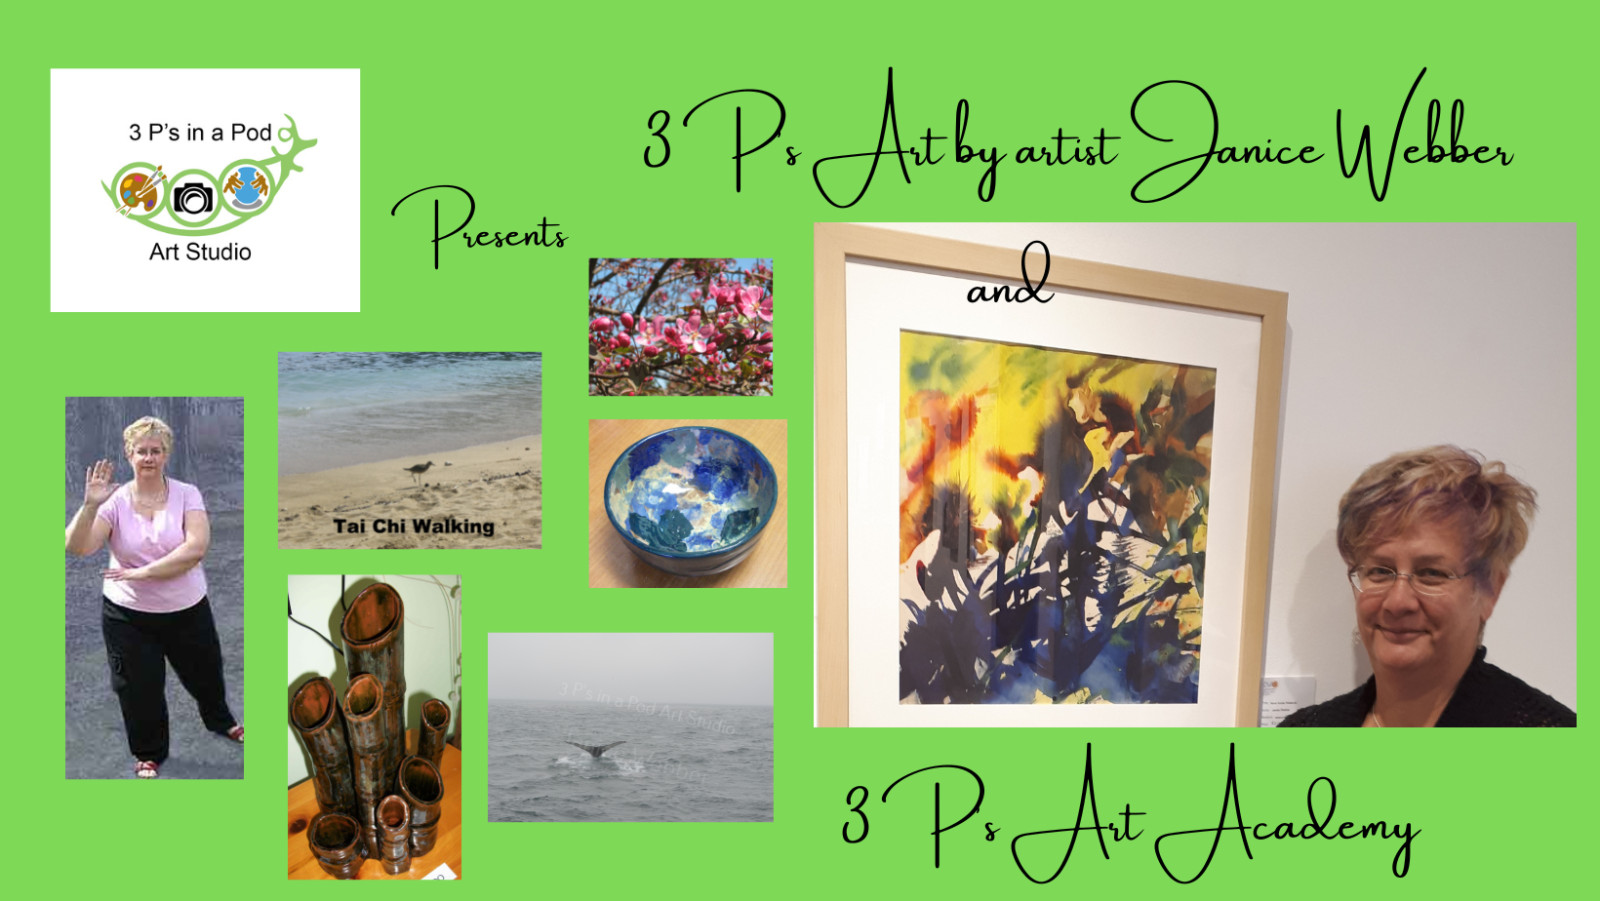 What's new at 3 P's in a Pod Art Studio - part 1